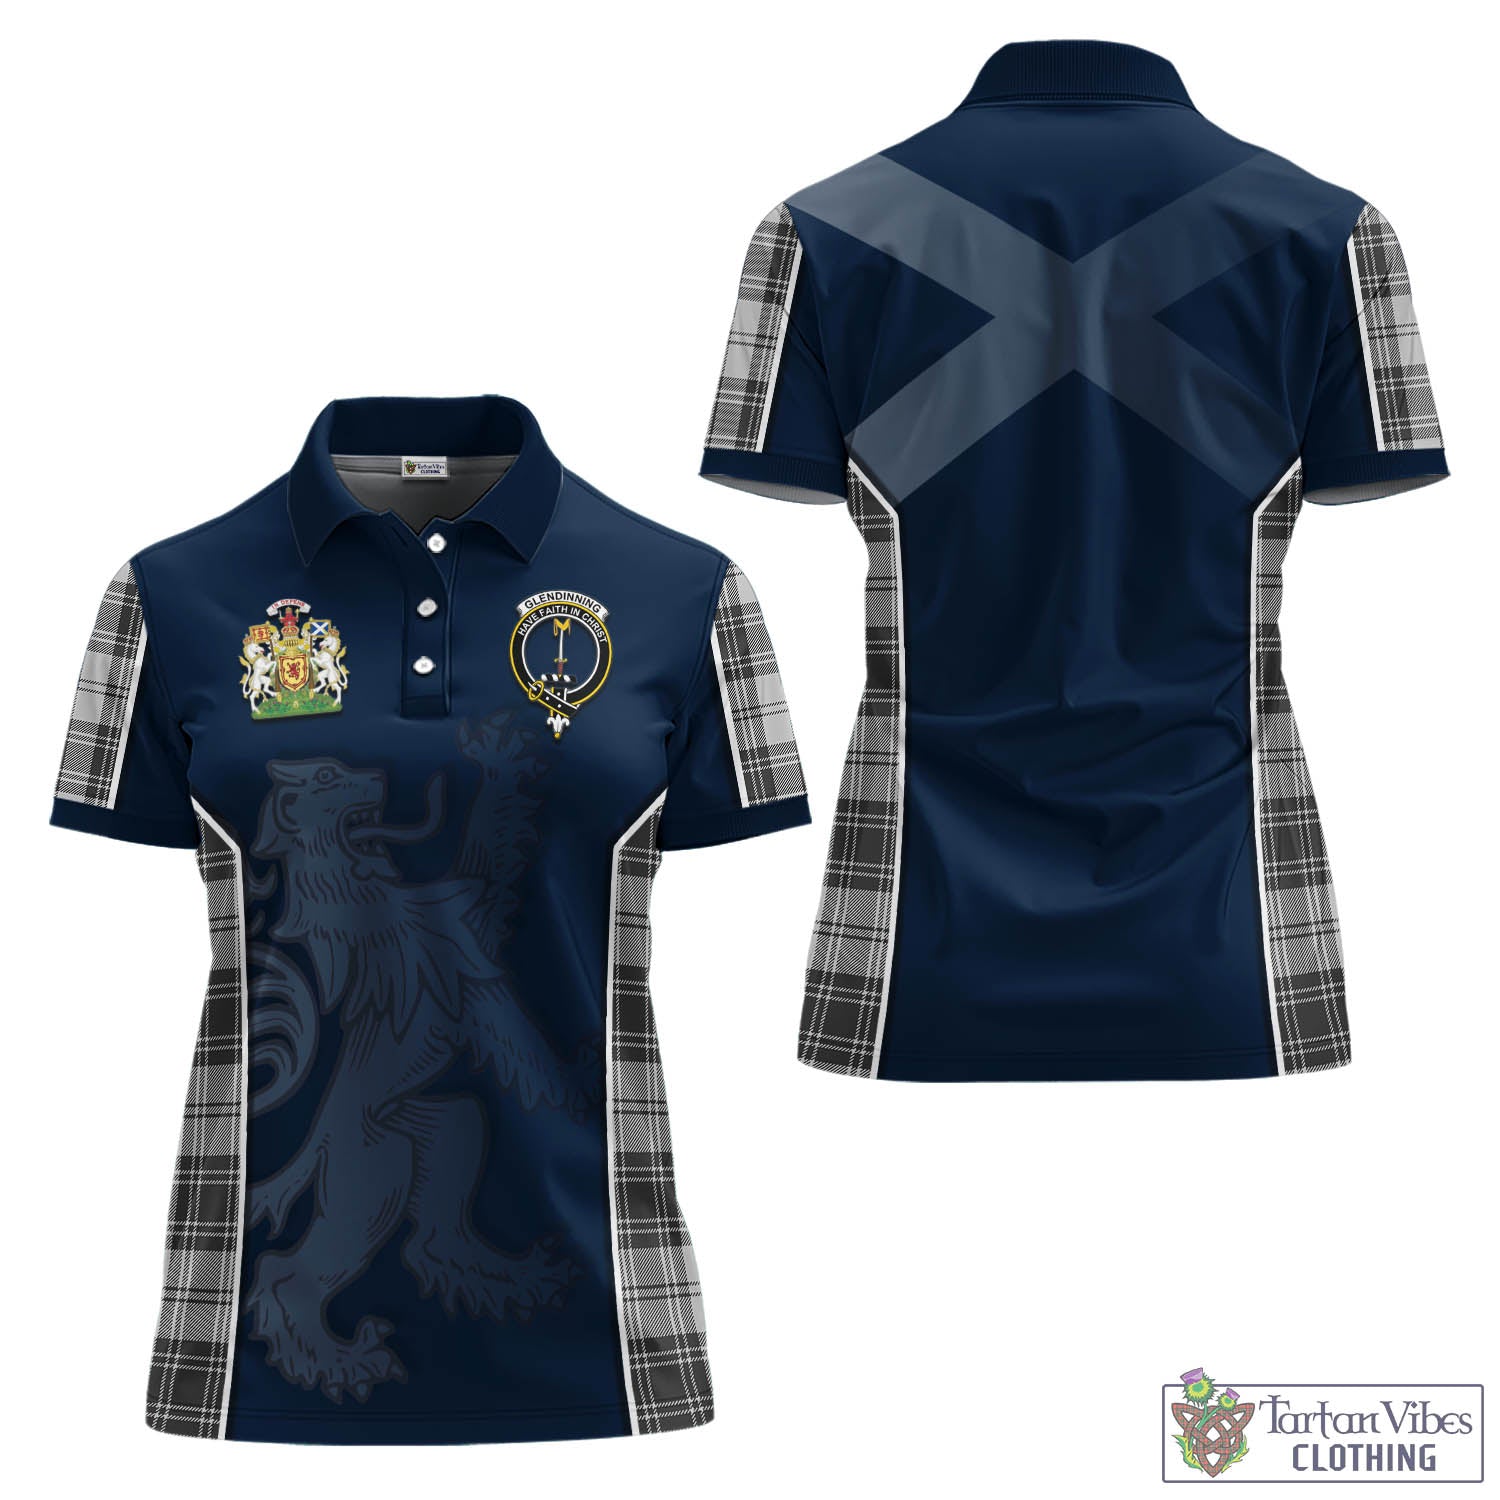 Tartan Vibes Clothing Glendinning Tartan Women's Polo Shirt with Family Crest and Lion Rampant Vibes Sport Style